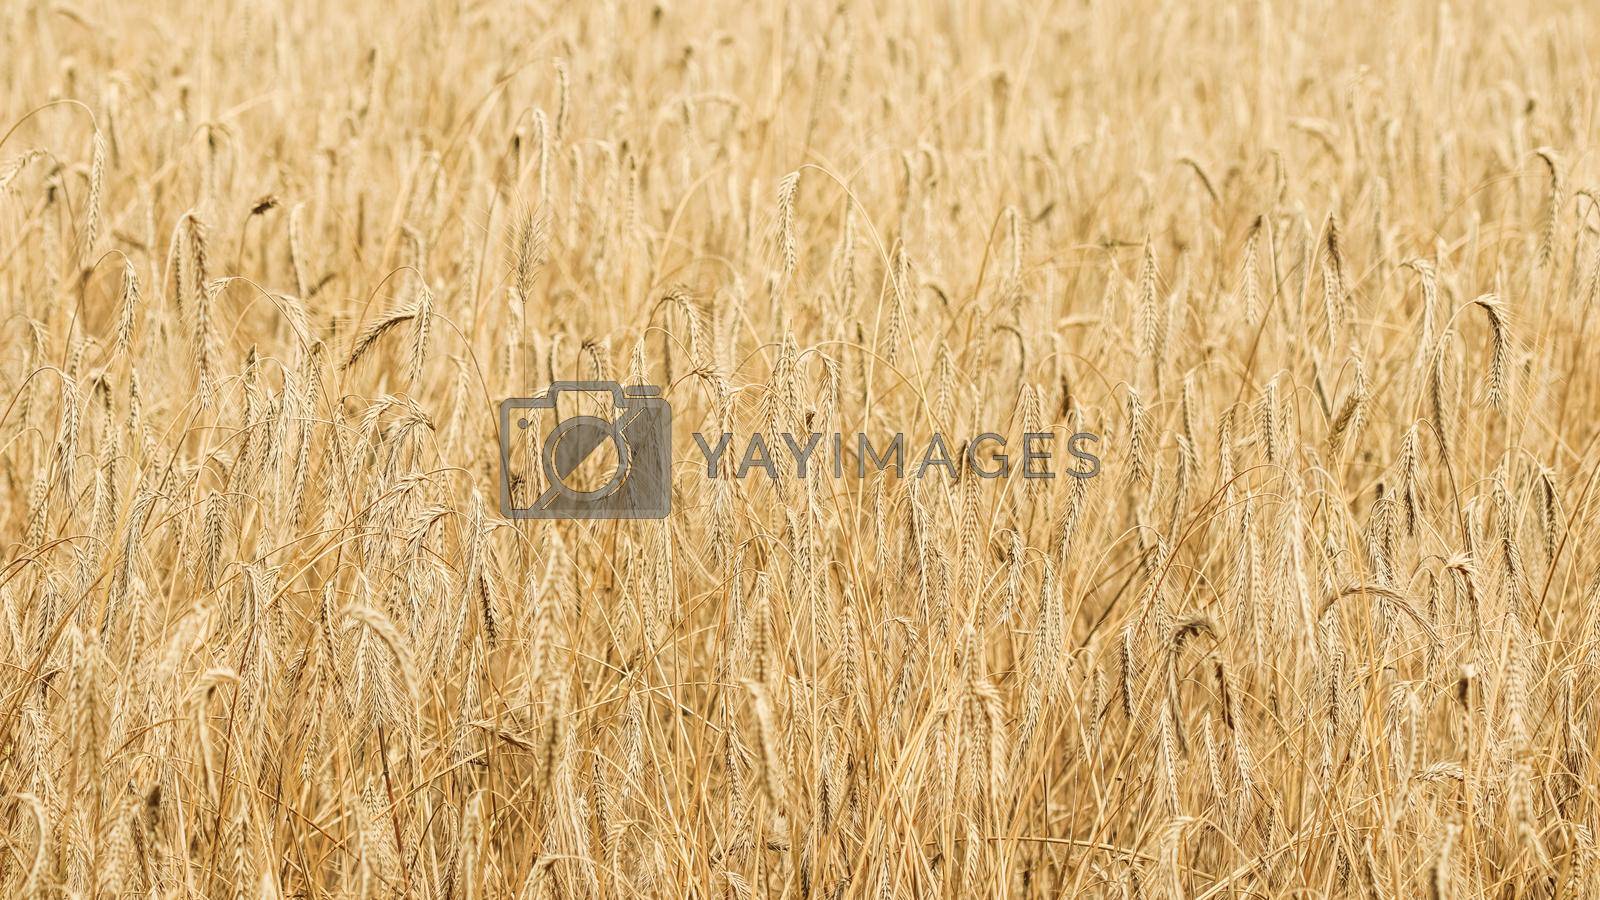 Royalty free image of Dry ripe rye spicas of meadow field. Rural scenery, natural background. Agriculture, harvest concept. by Olayola